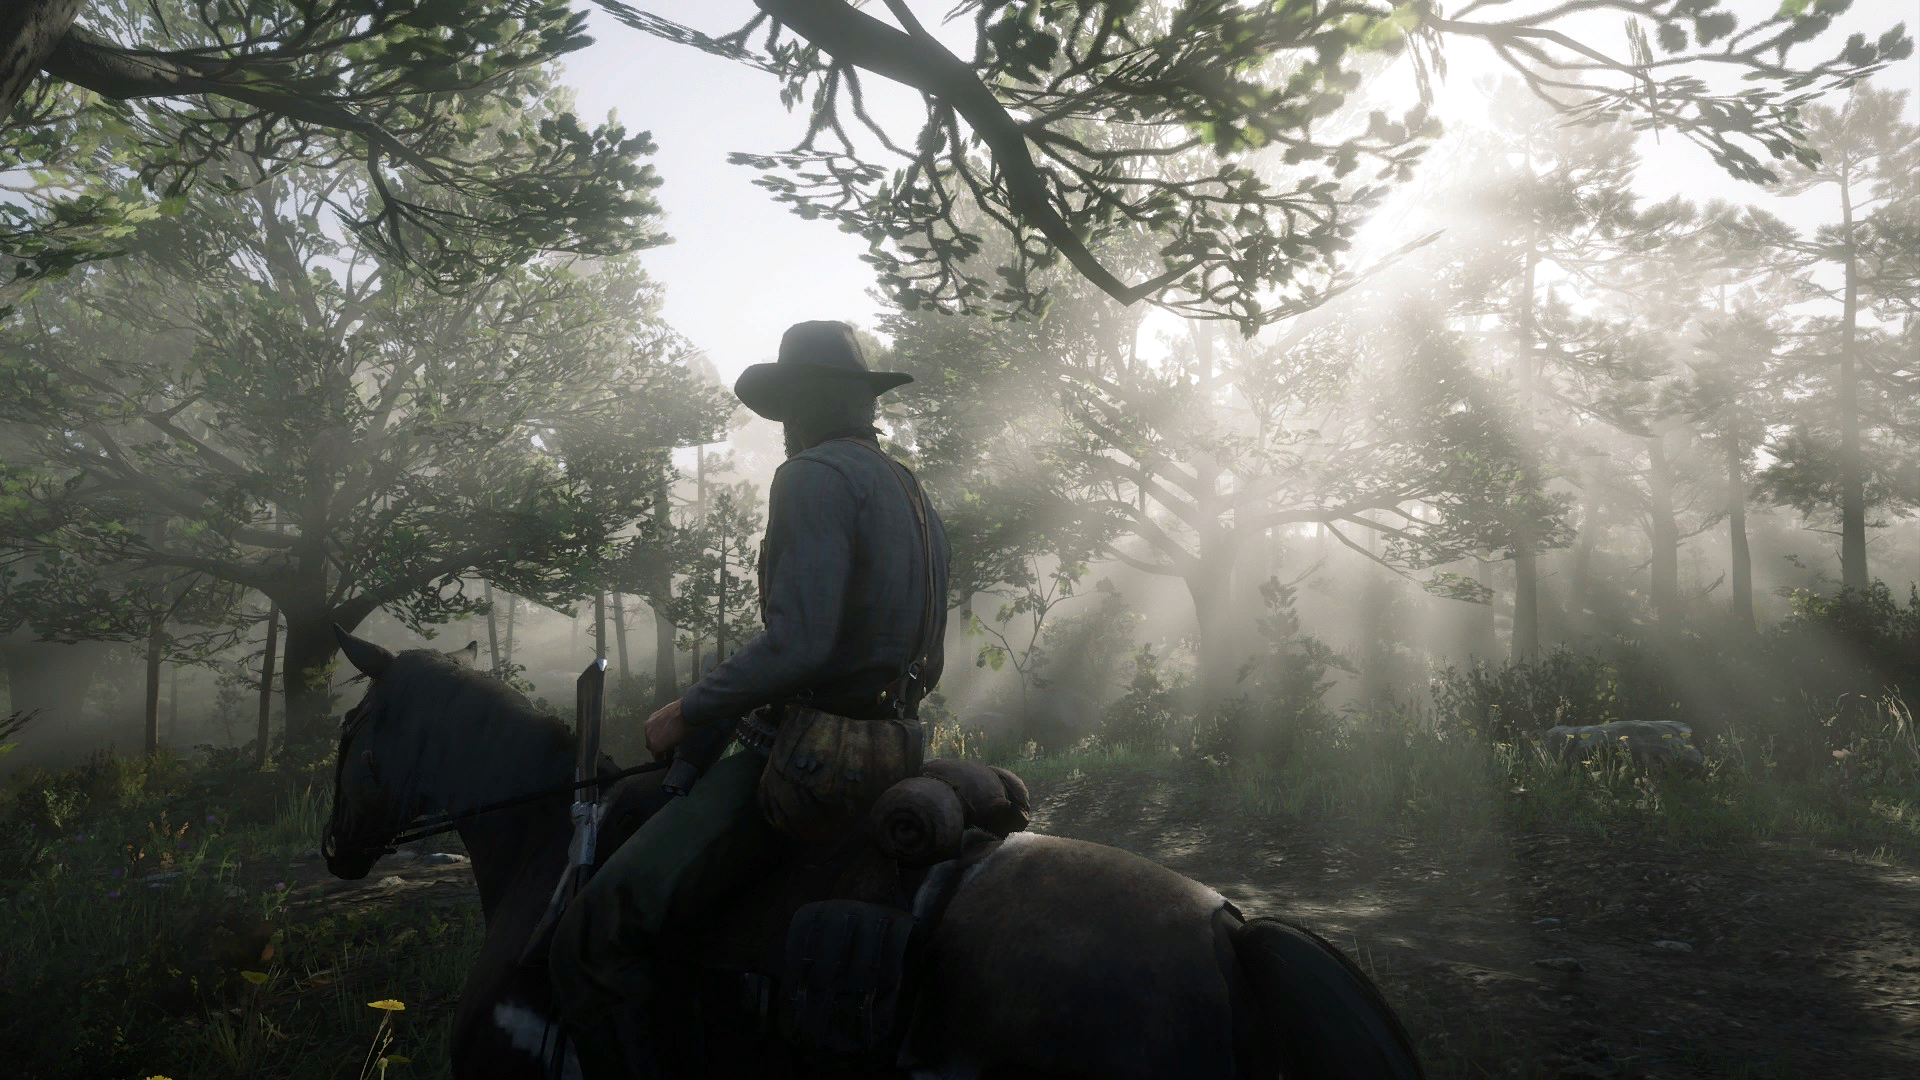 General 1920x1080 Red Dead Redemption Red Dead Redemption 2 video games horseback video game characters CGI Rockstar Games sunlight video game art trees boys with guns nature animals leaves branch gun horse video game men hat forest screen shot